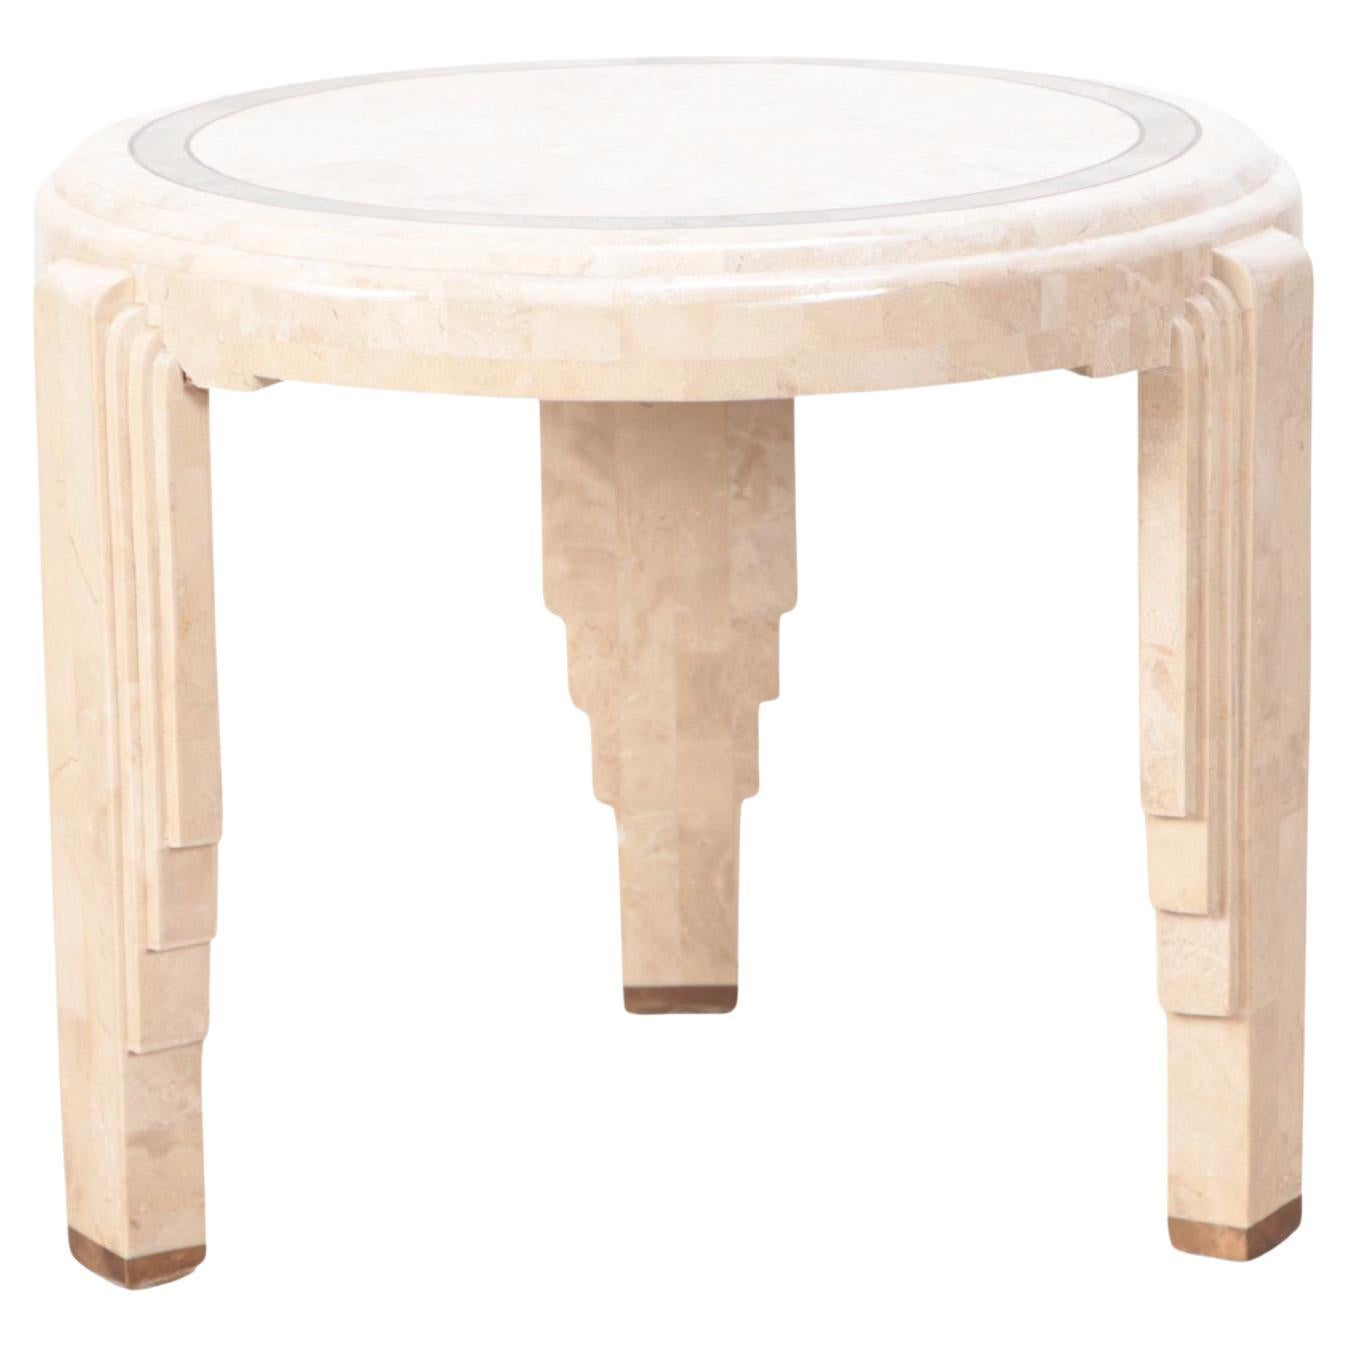 A Modern tessalated marble Art Deco style occasional table.